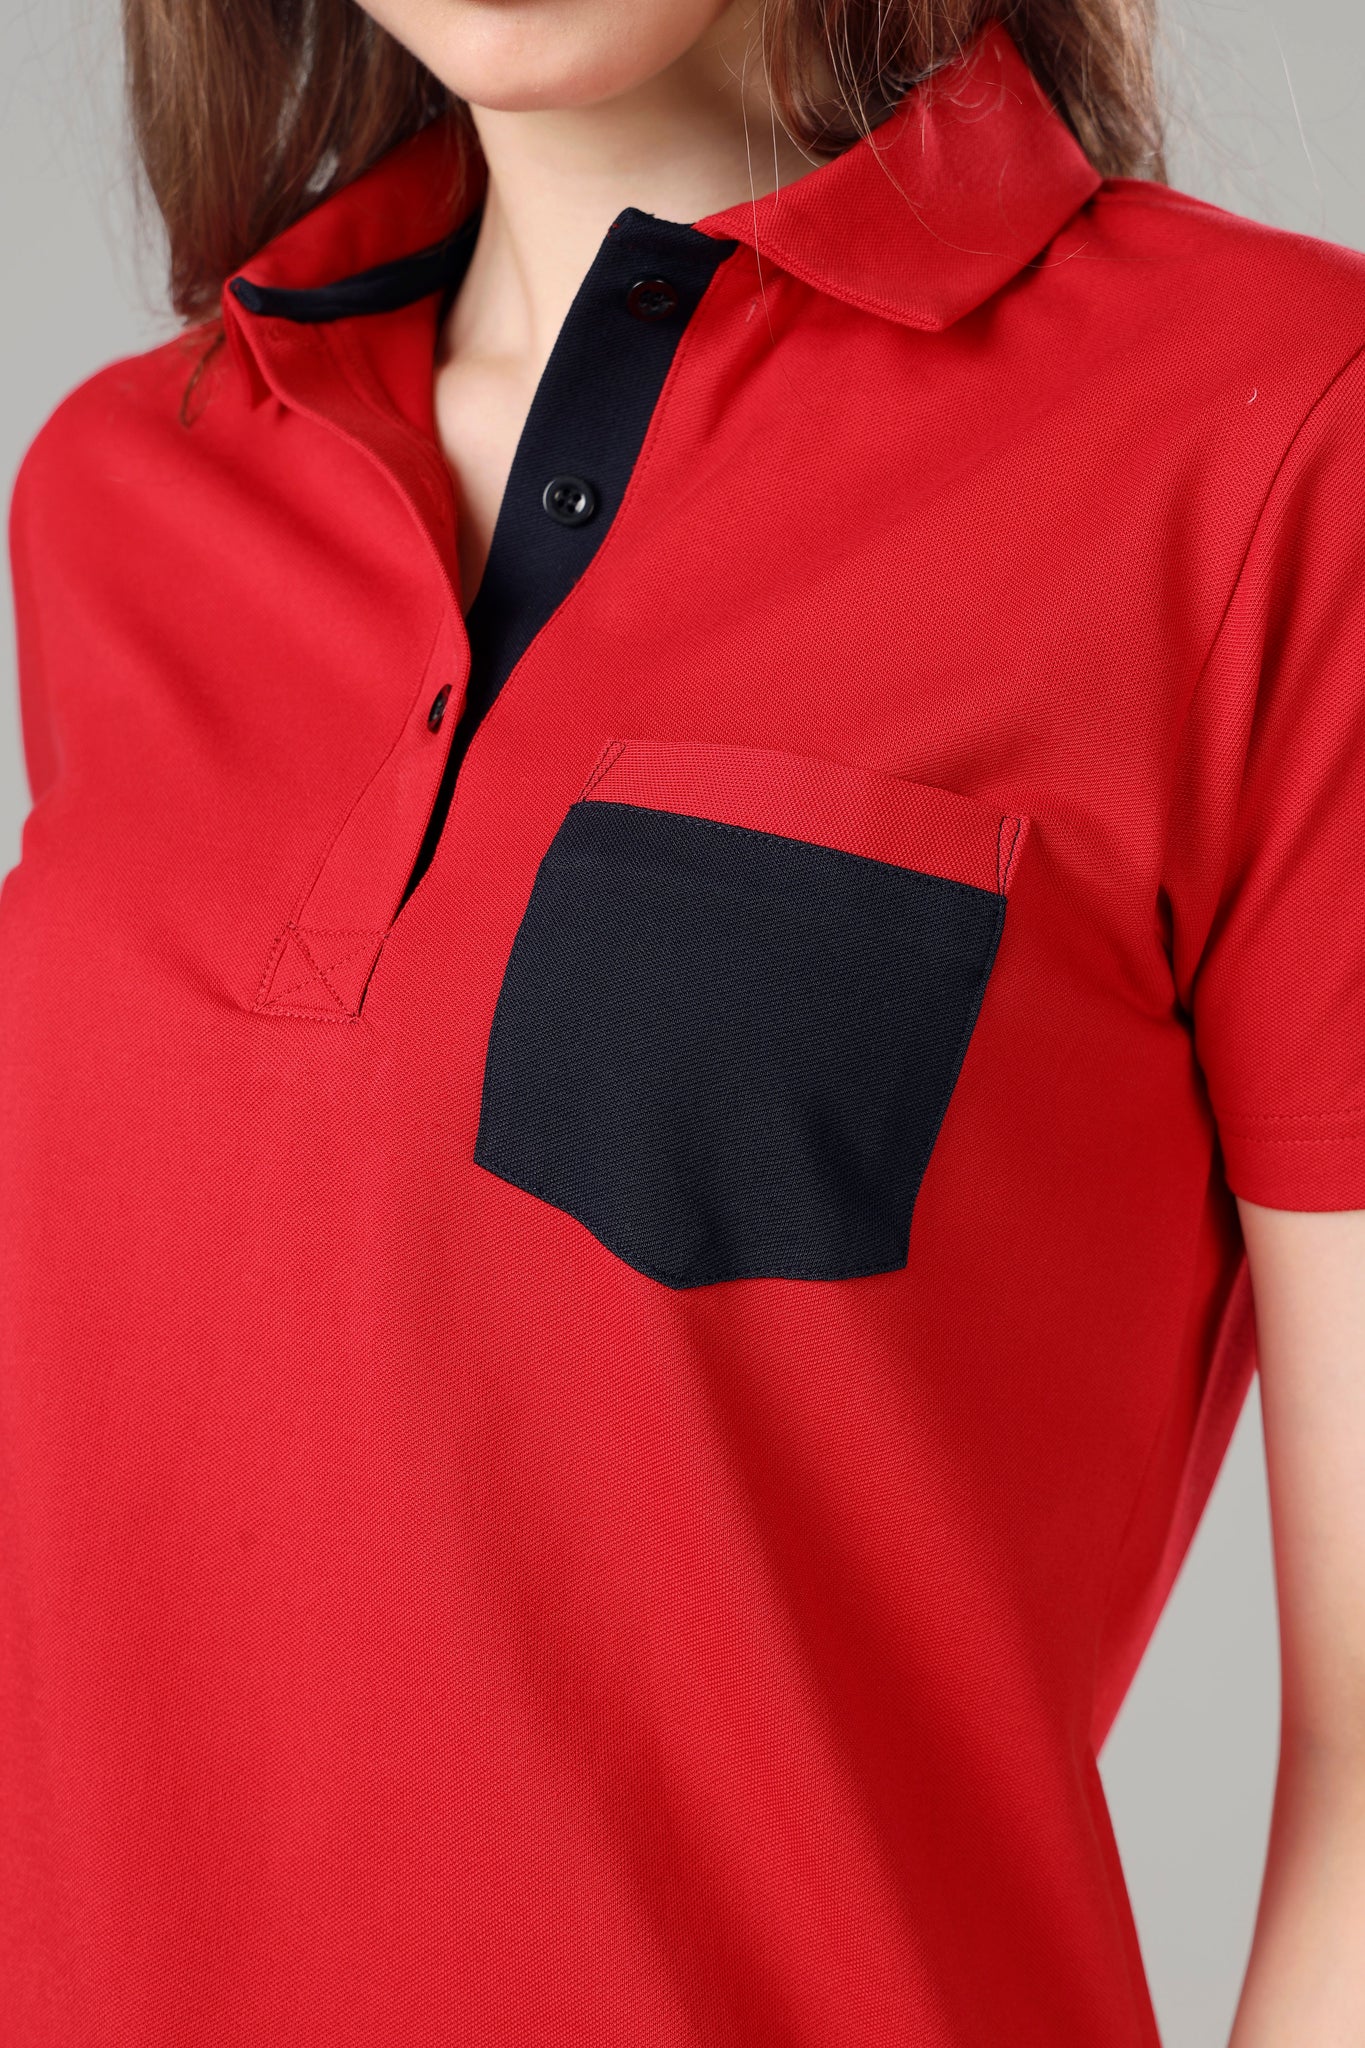 Exclusive Scarlet Red Polo T-Shirt For Women